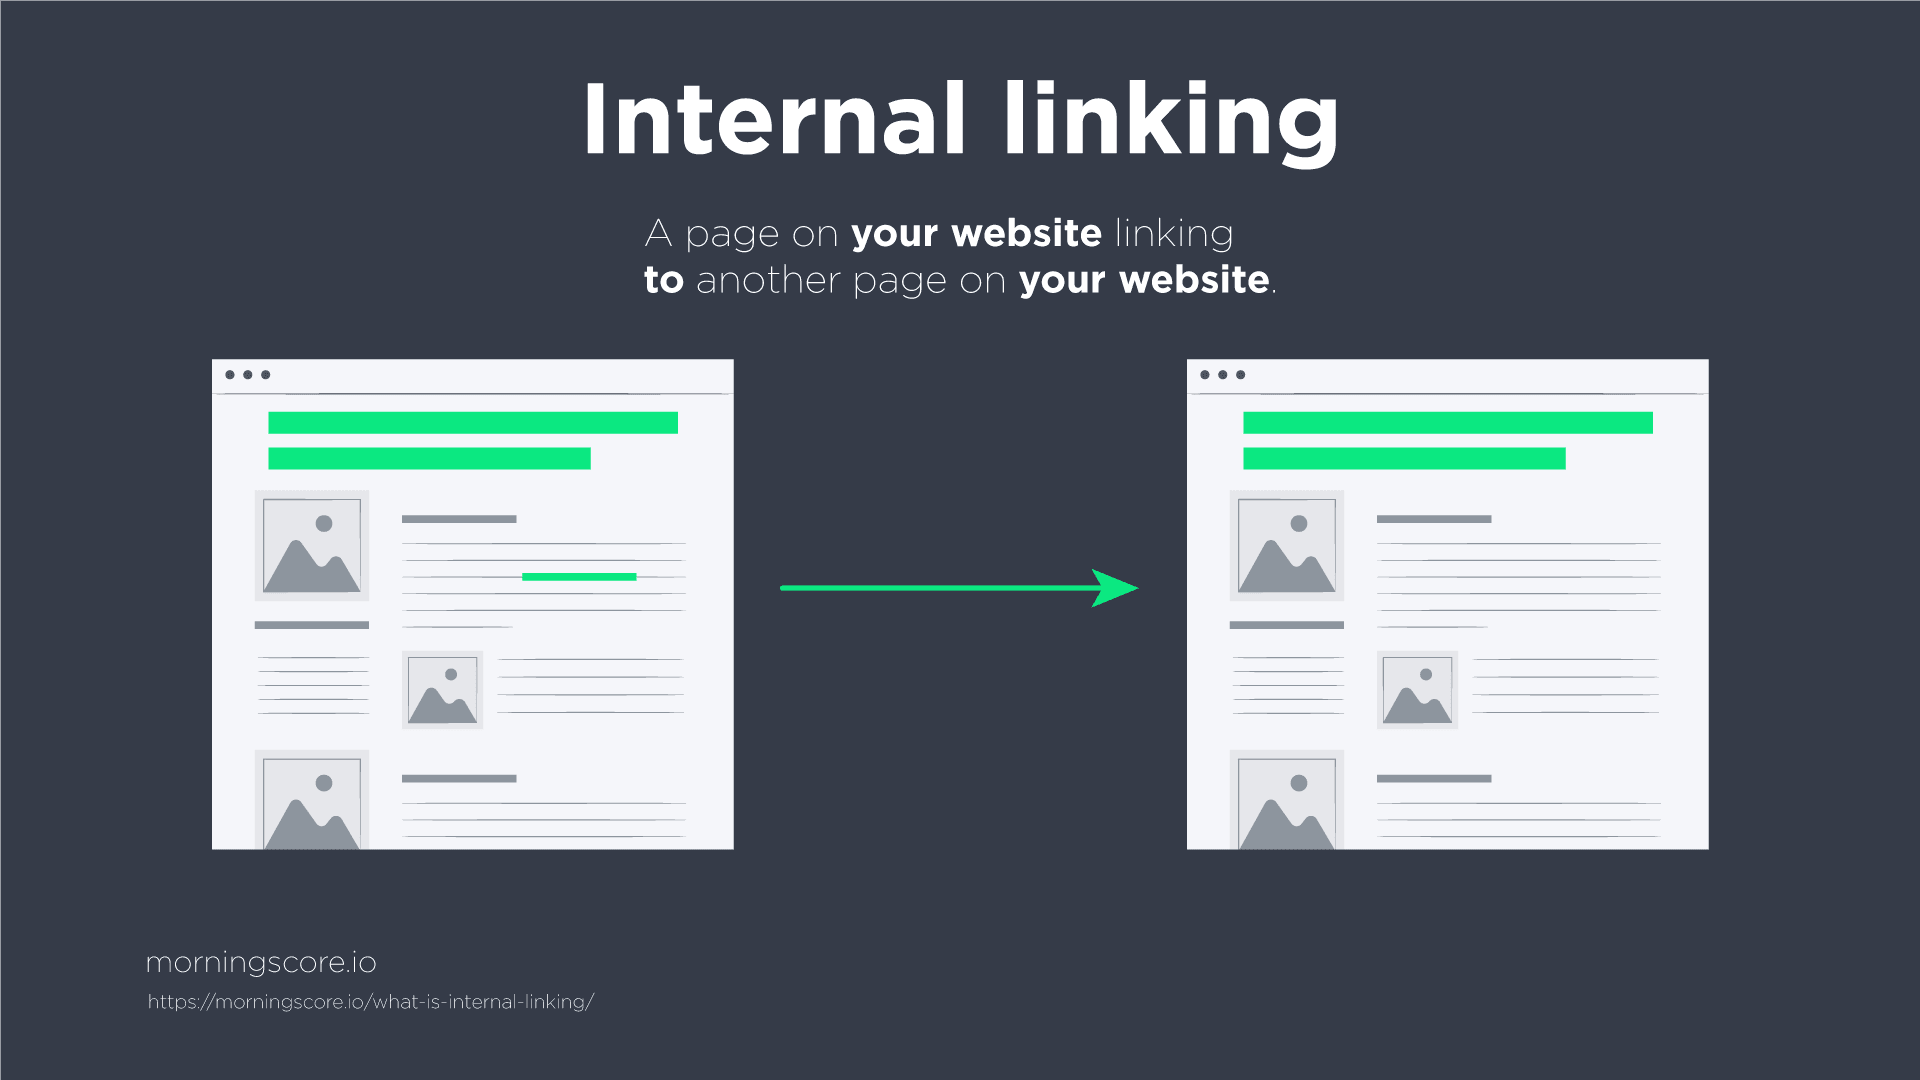 what is internal linking in SEO, and how does it work